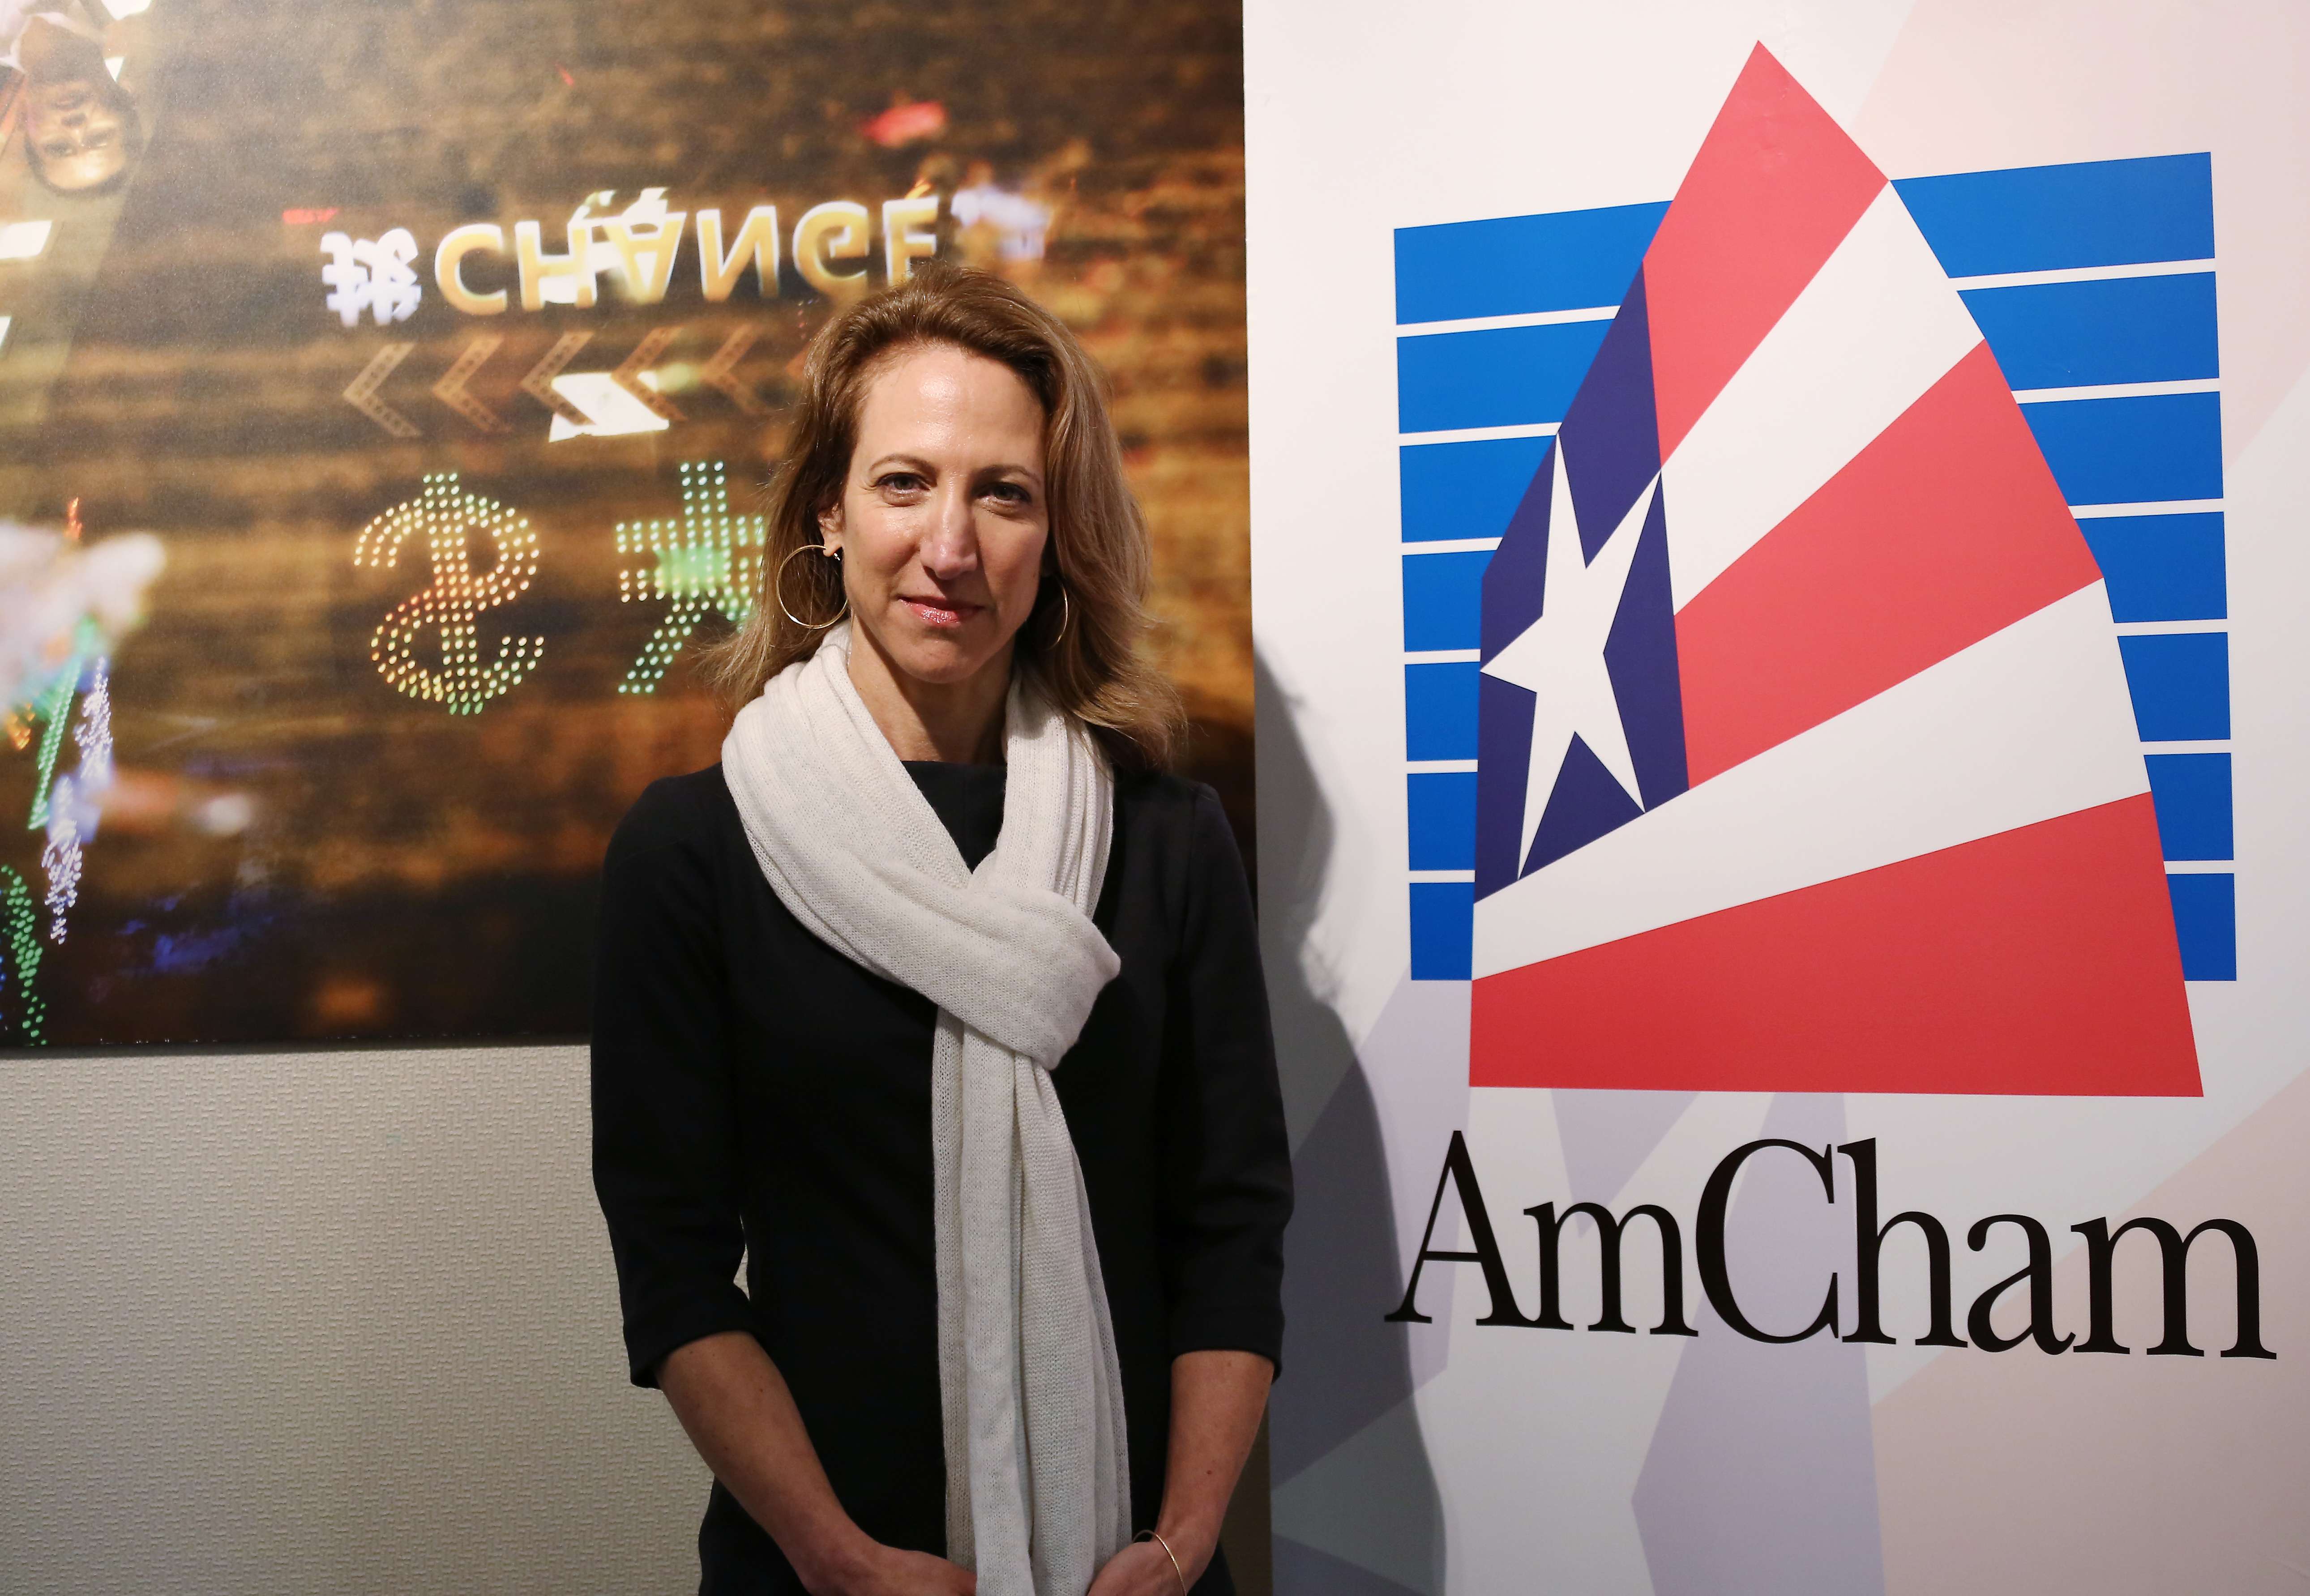 AmCham president Tara Joseph, says the ‘one country, two systems’ model is hard for outsiders to grasp. Photo: Jonathan Wong